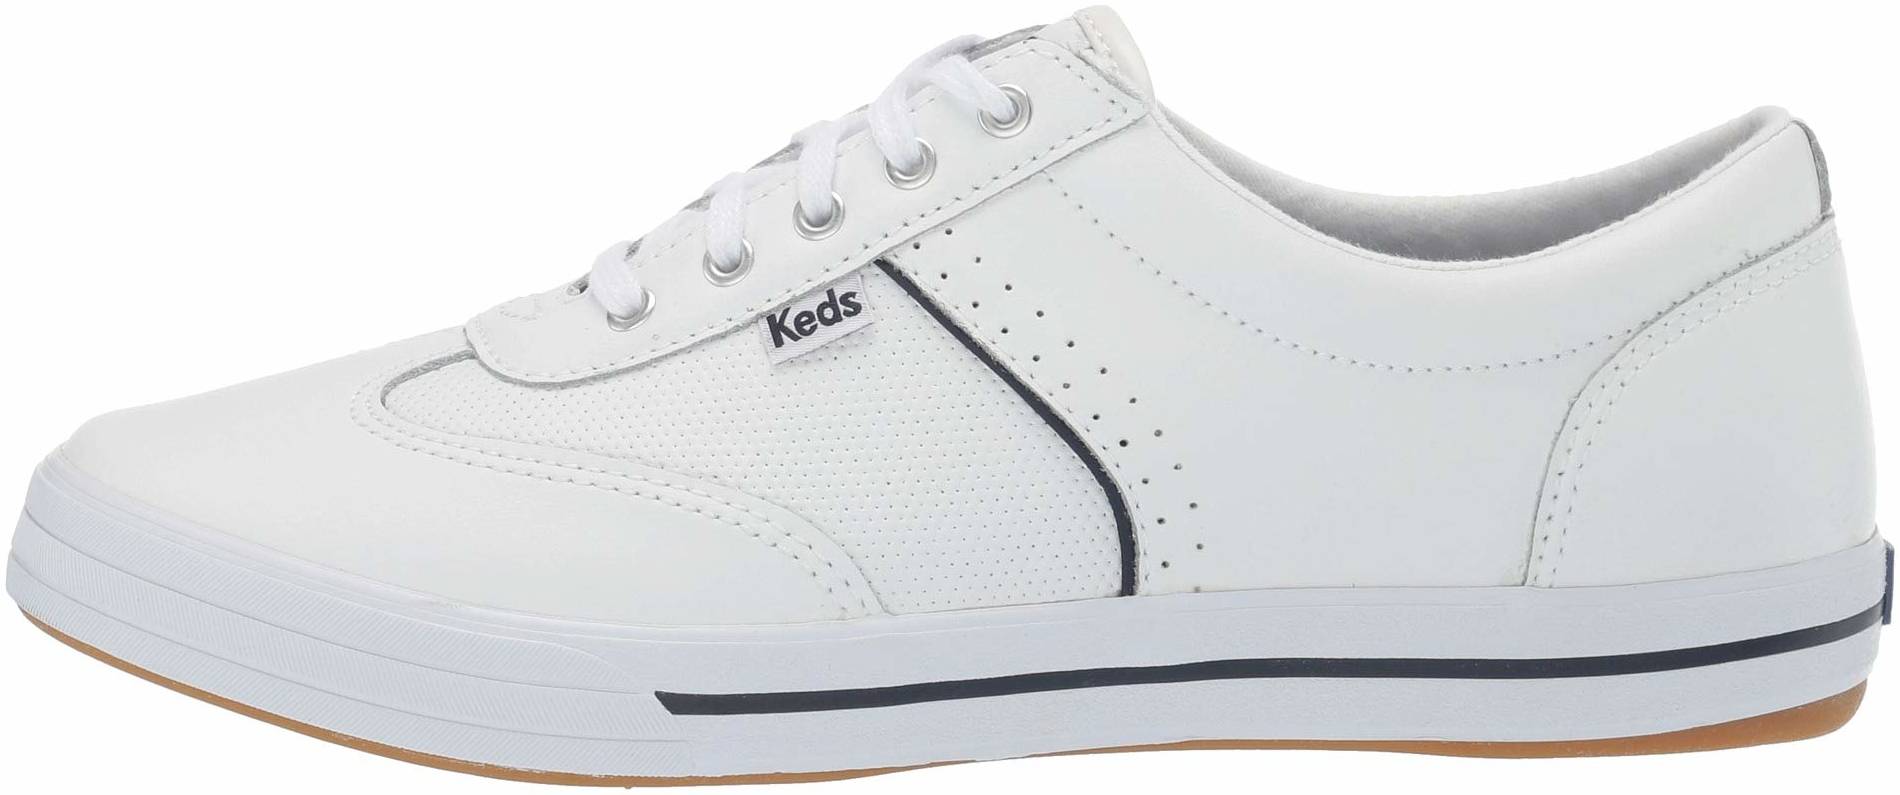 keds courty women's leather sneakers